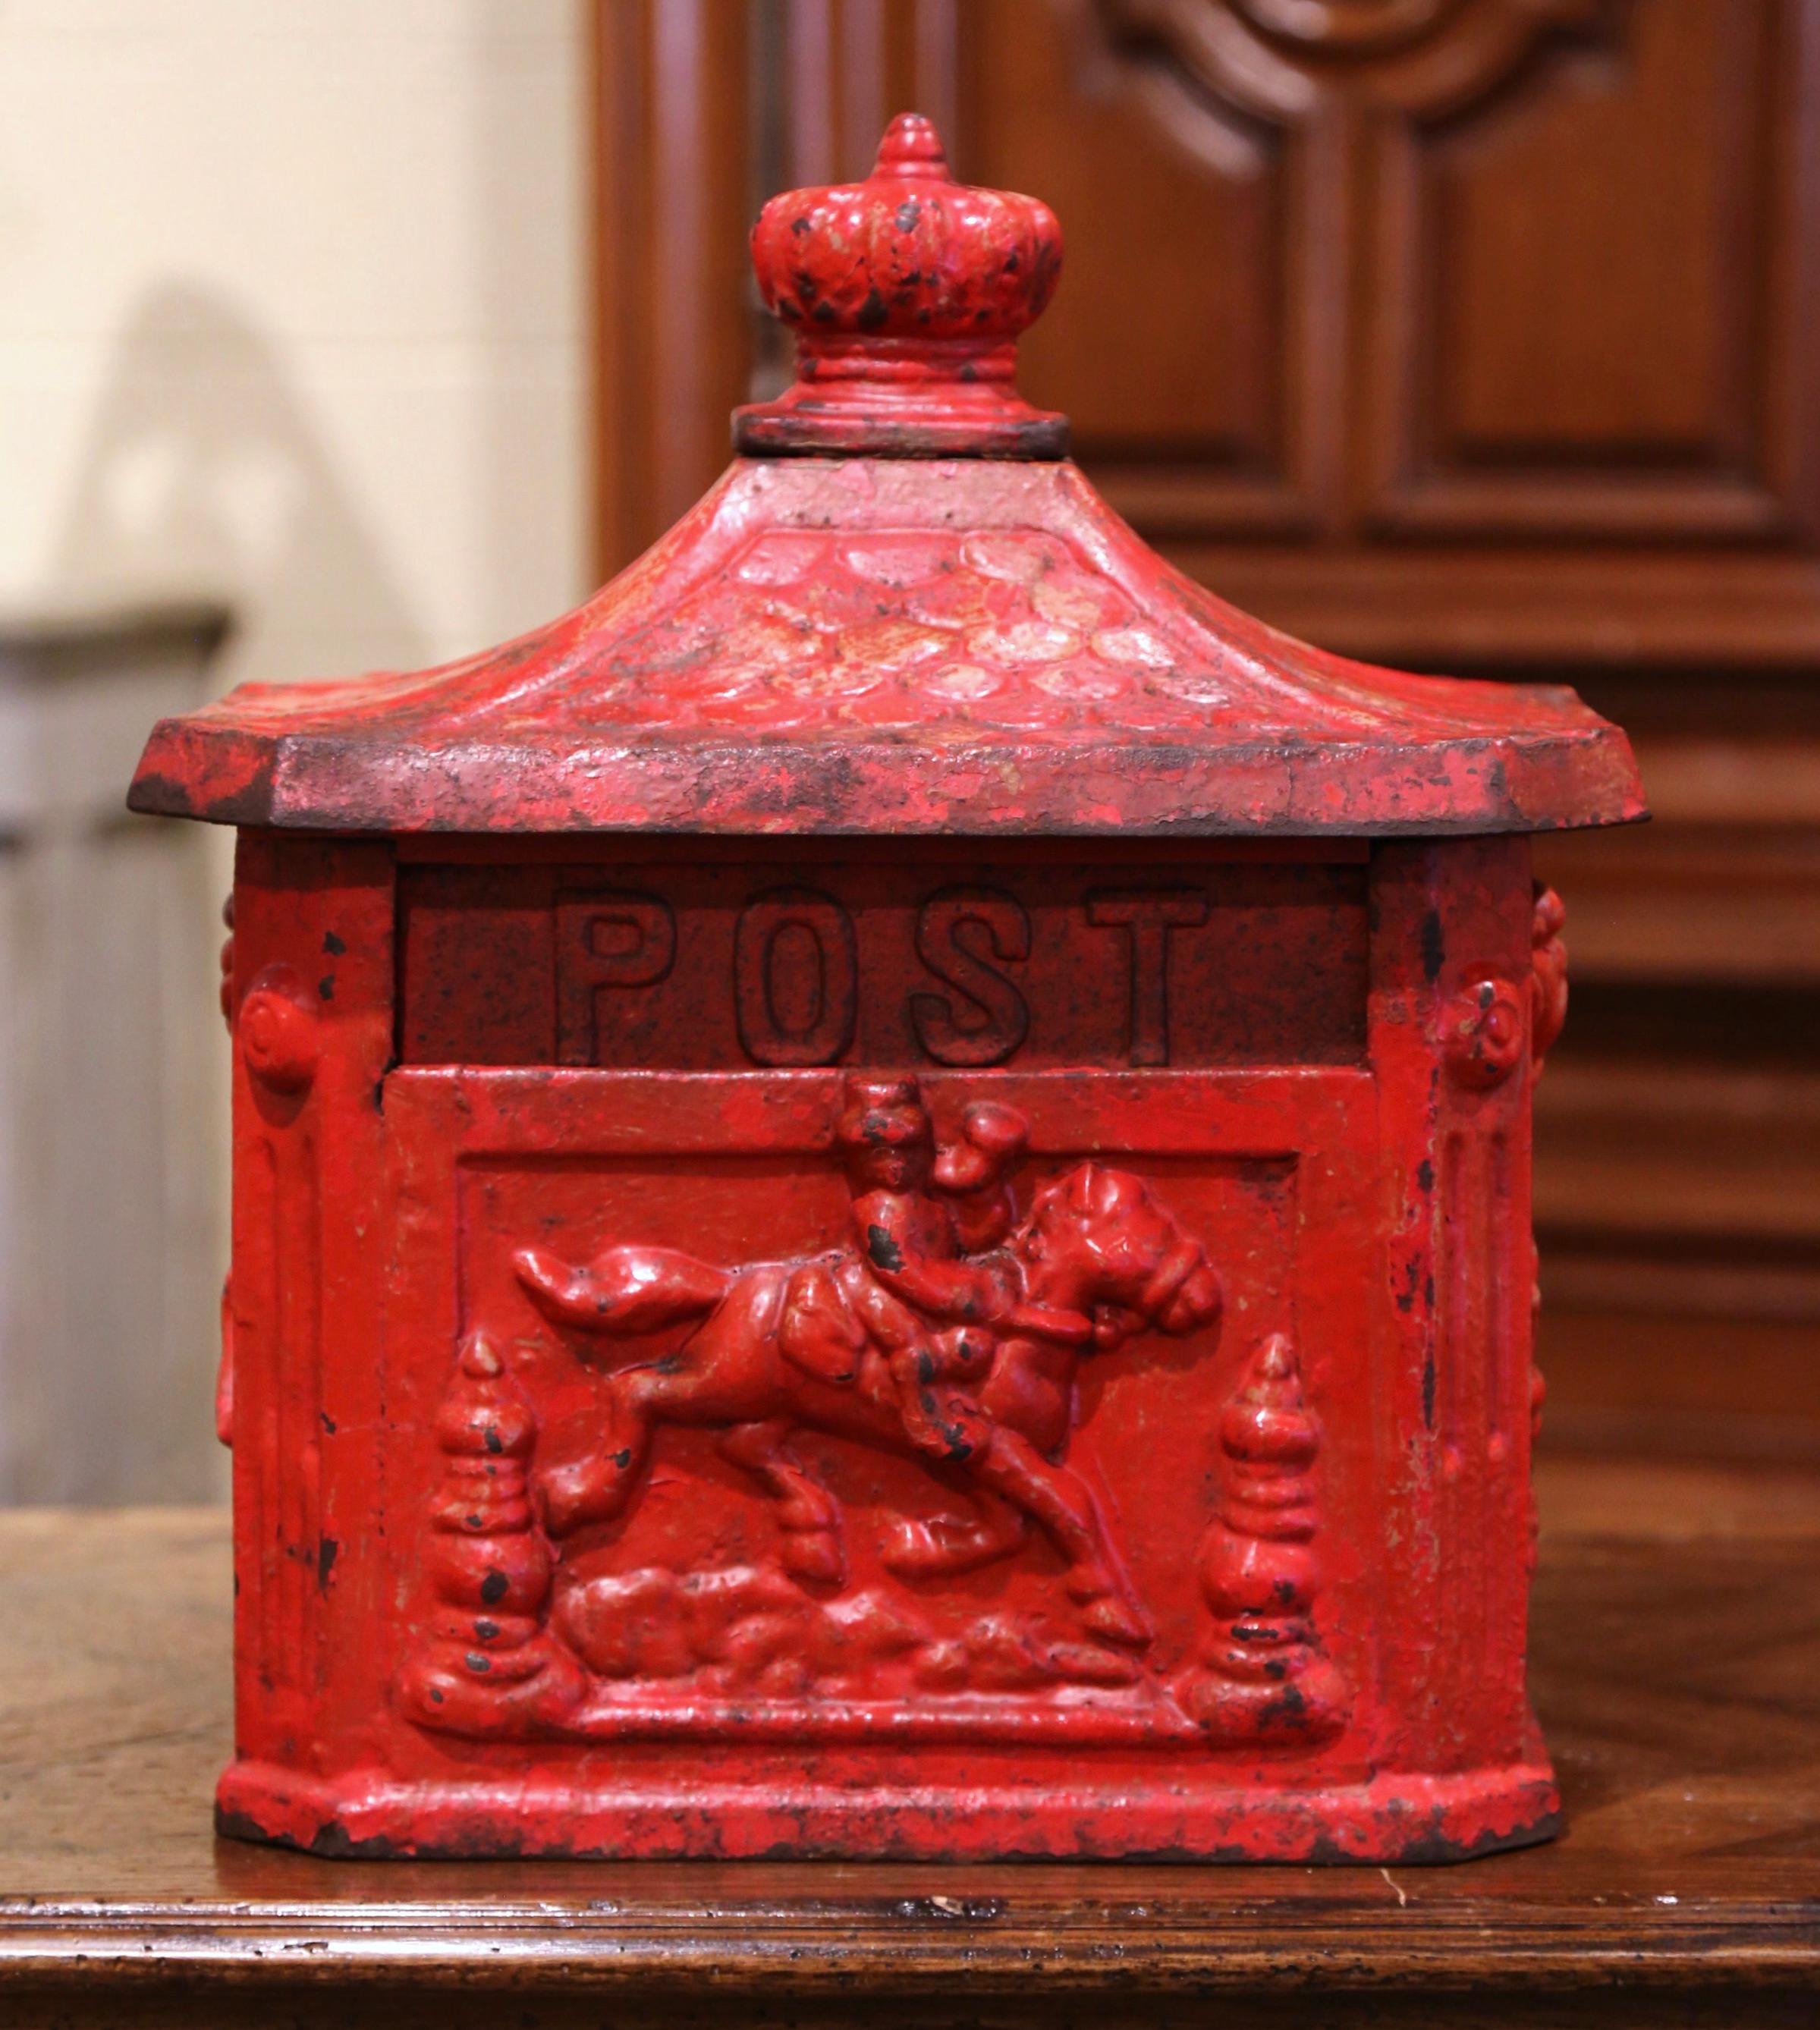 This antique iron mailbox was forged in England, circa 1880. The mail holder features high reliefs decorations on all four sides, including a pastoral scene and a horseman on the opposite side. The front has a letter slot with word 